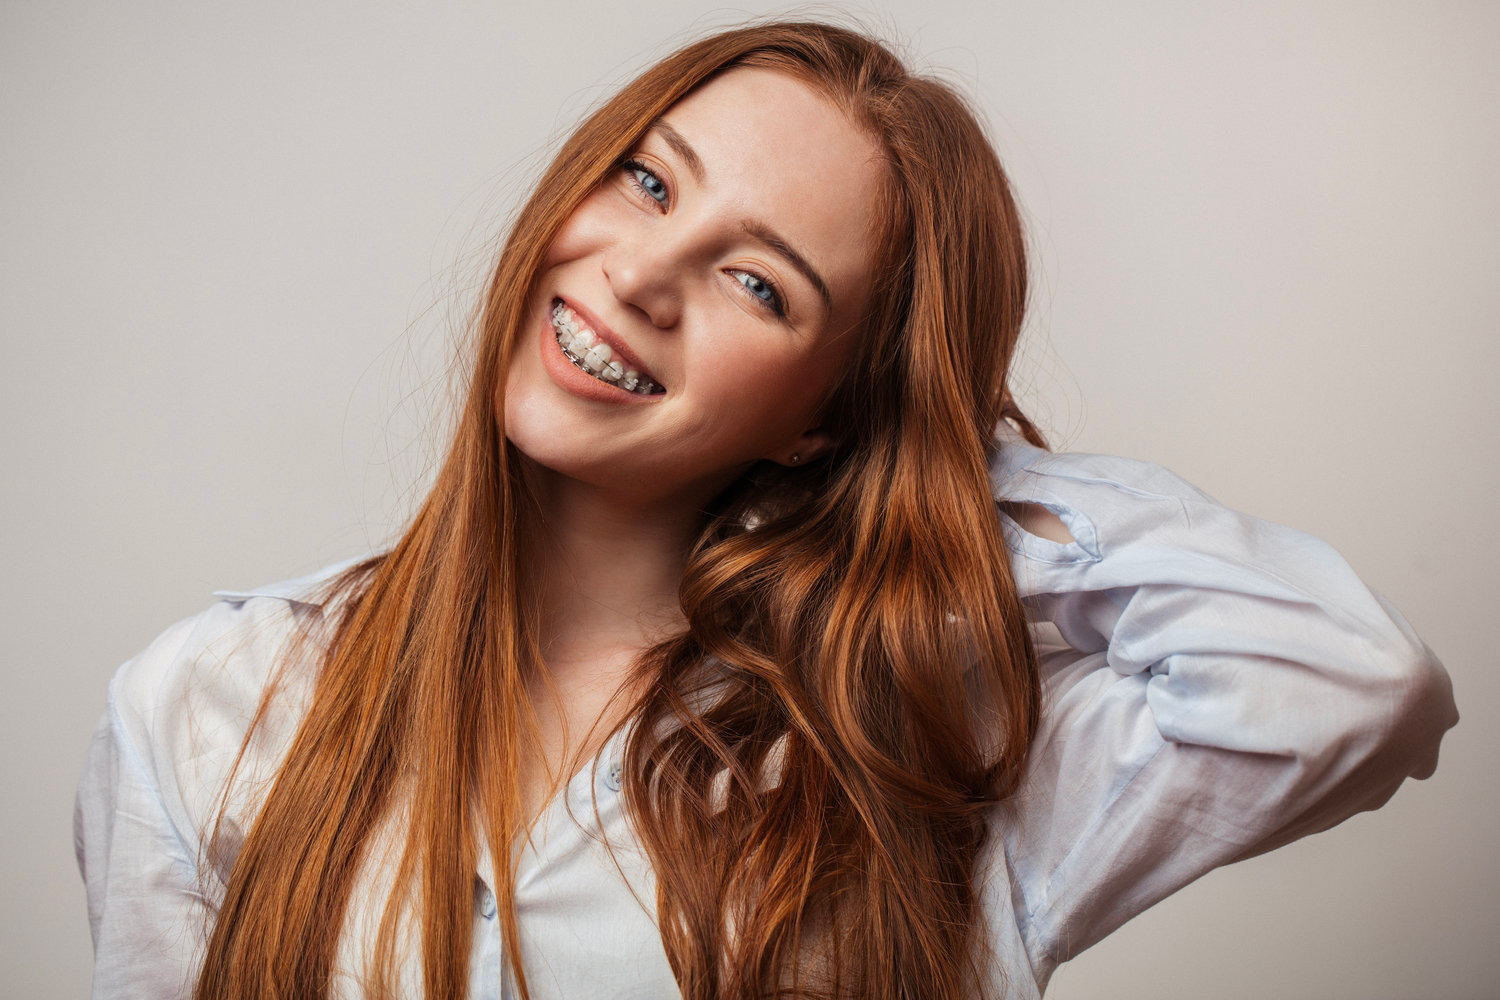 Affordable Braces for Adults Atlanta